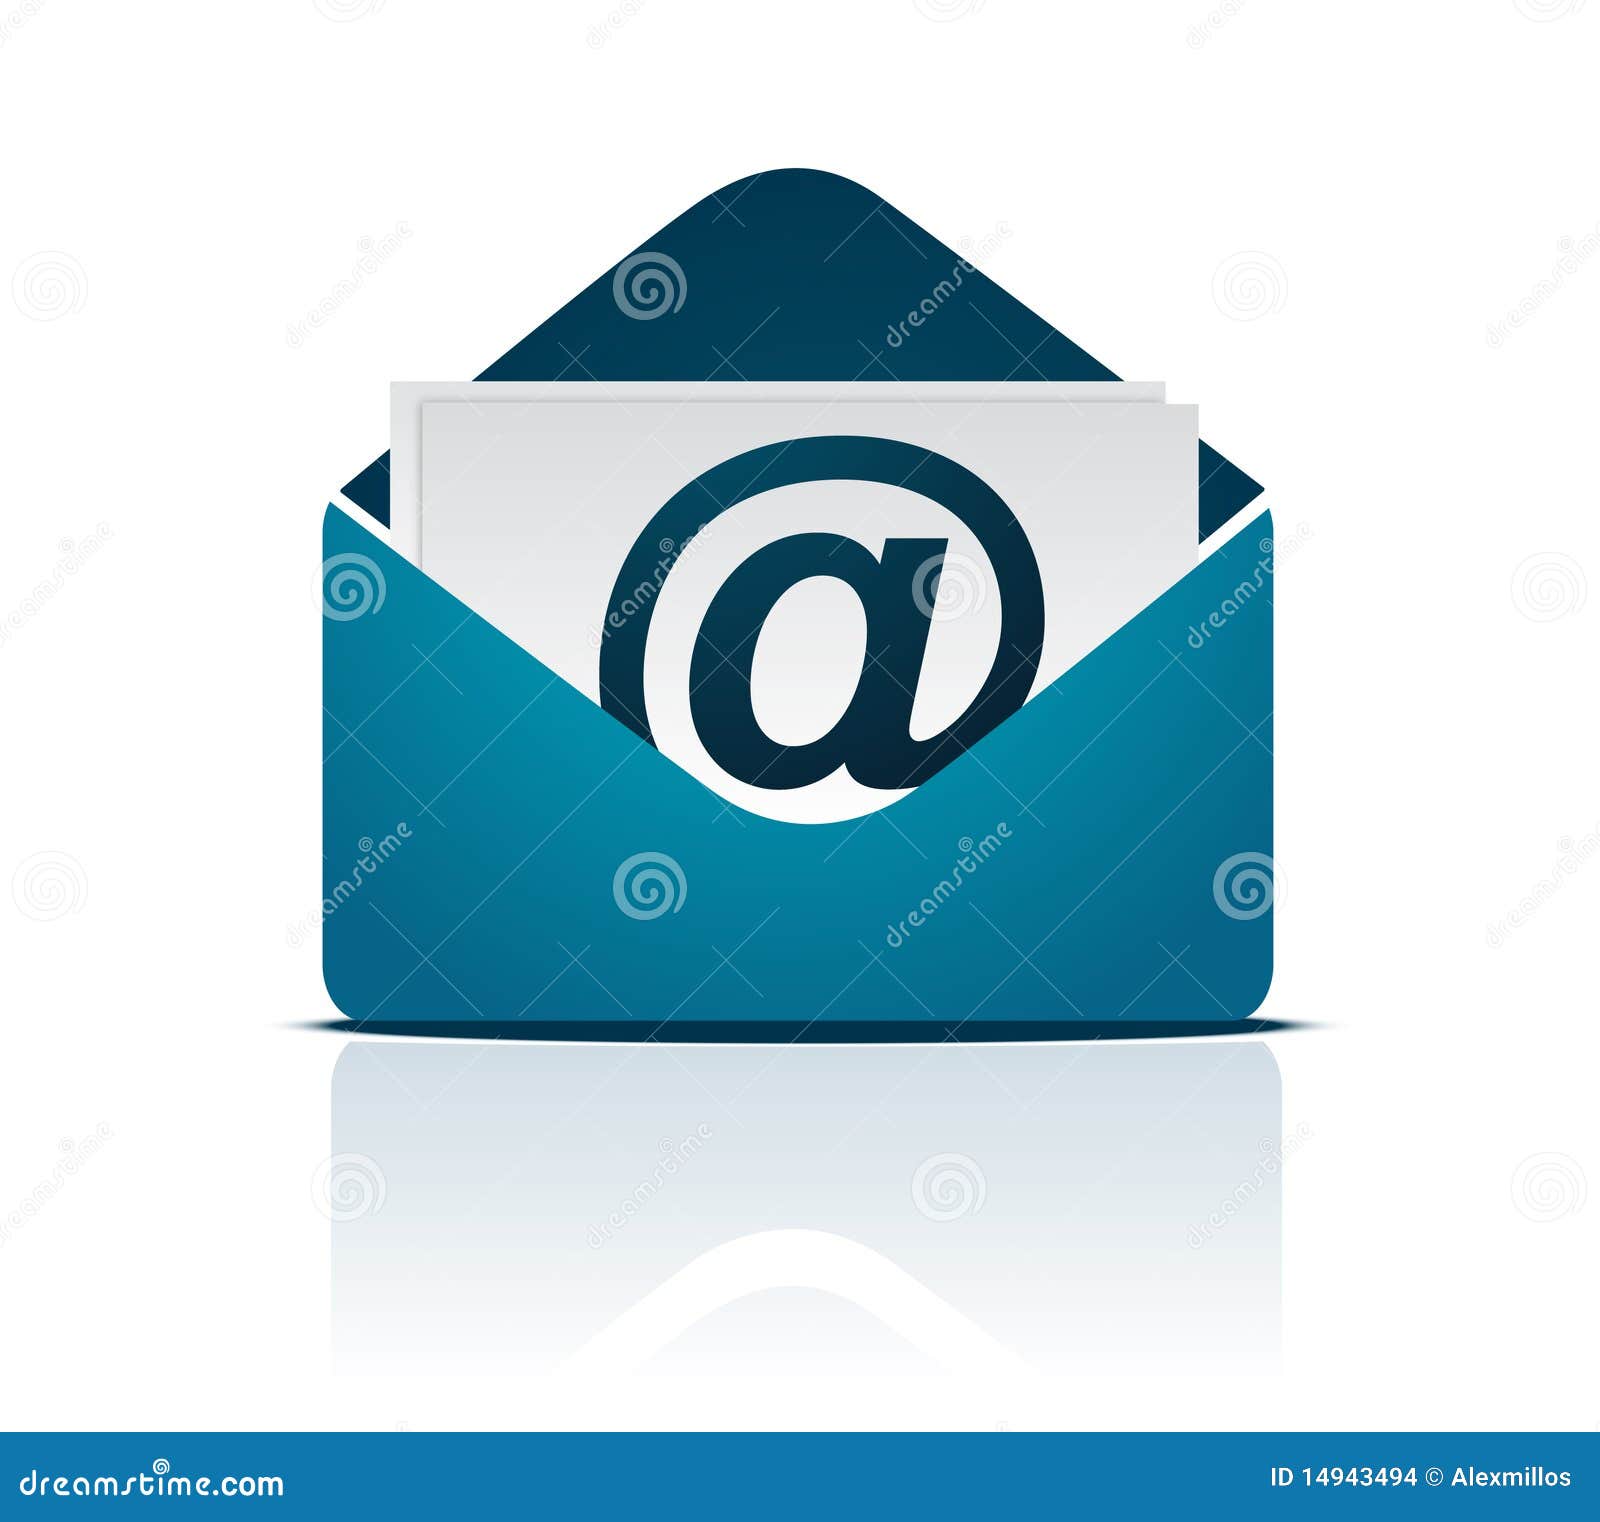 email clipart vector - photo #20